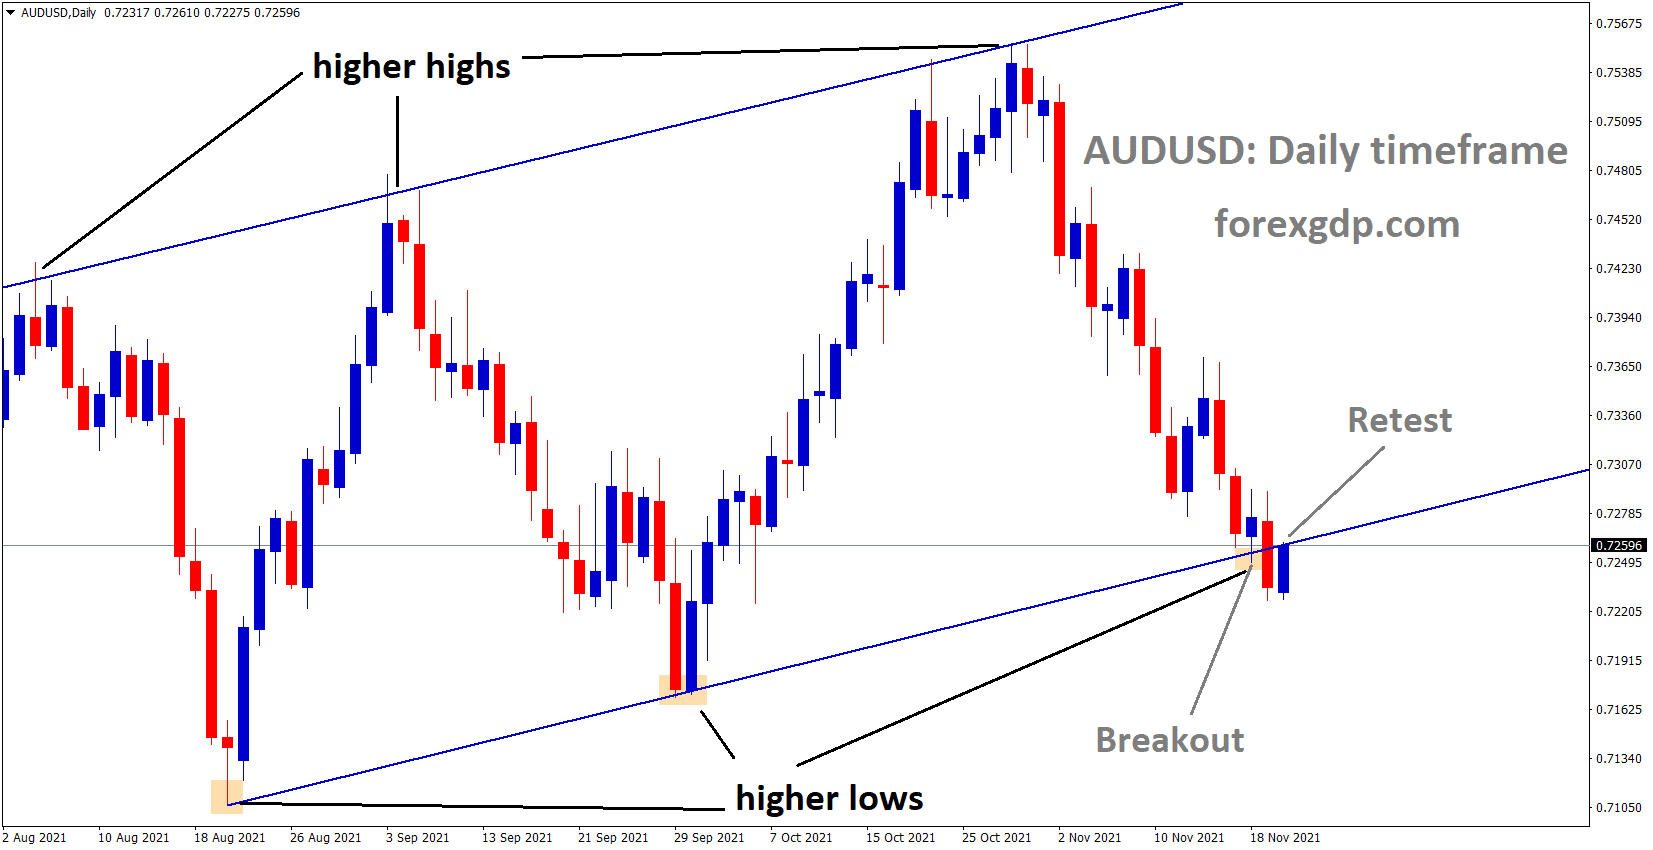 AUDUSD has broken the Ascending channel and market again retesting the Broken area of the channel